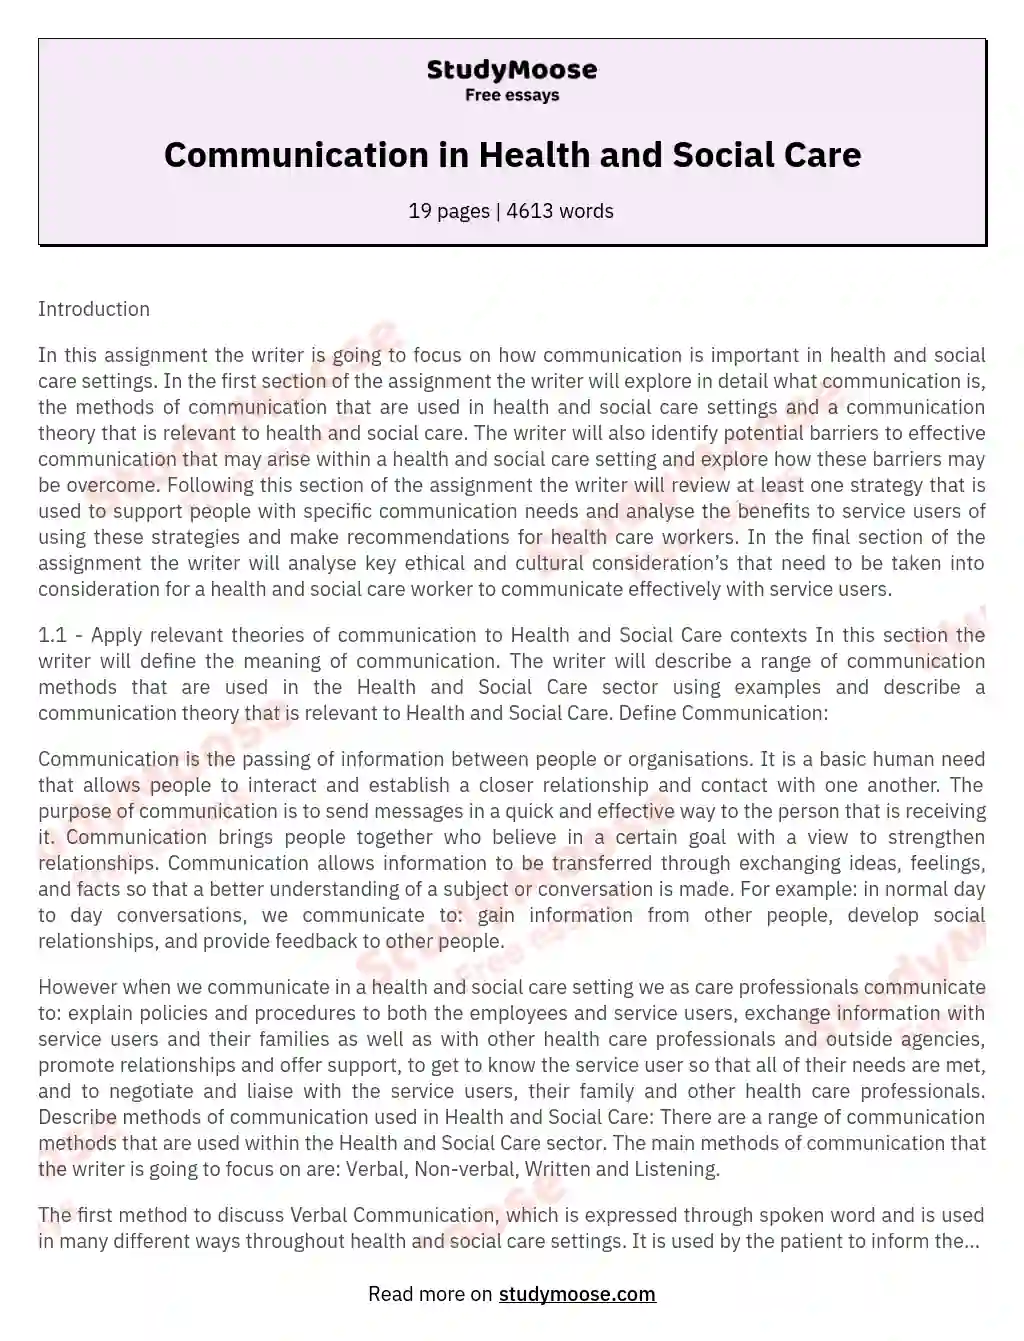 Communication in Health and Social Care essay